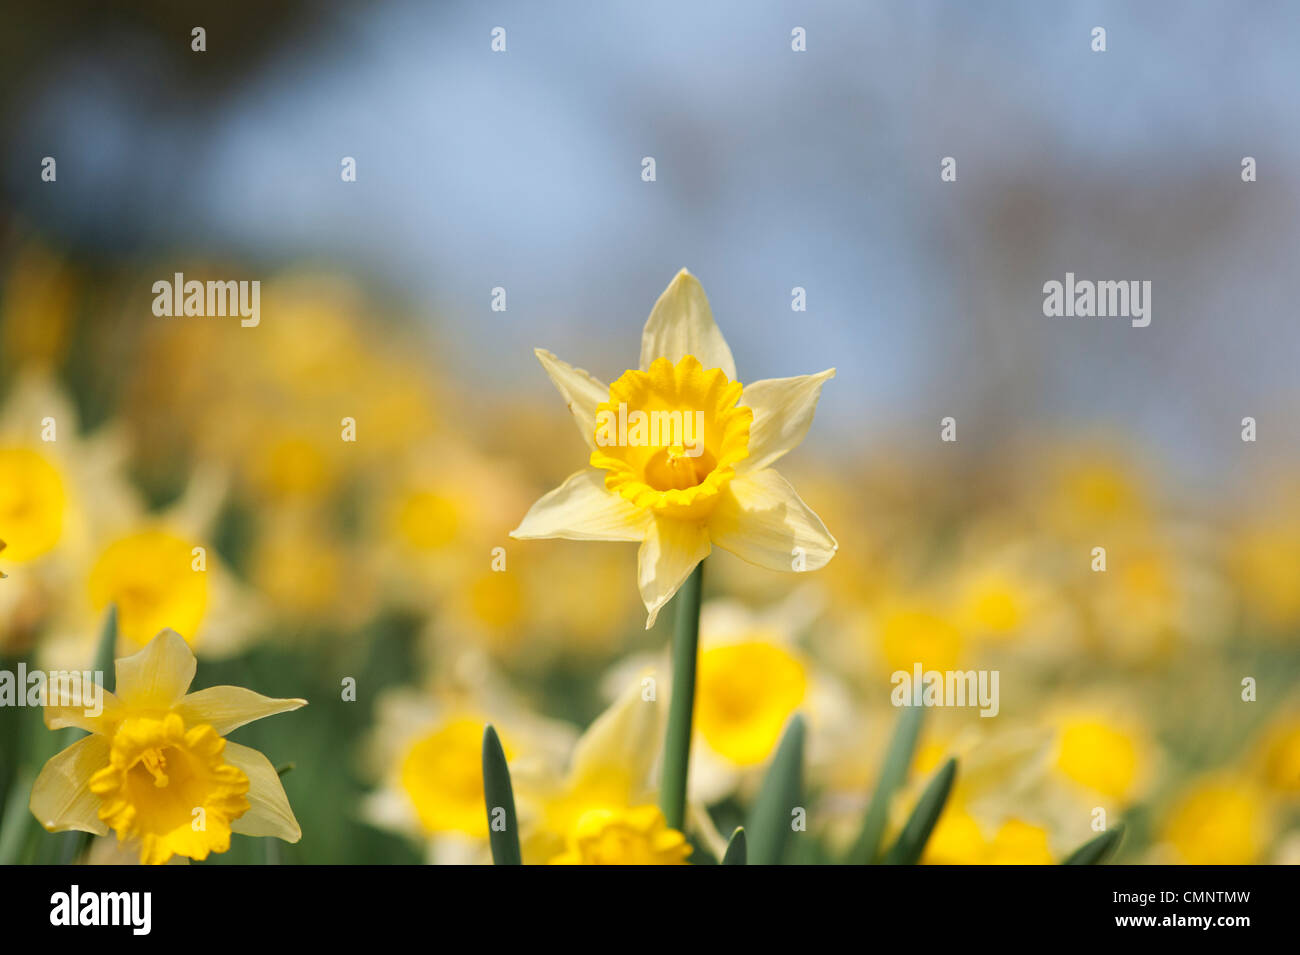 Narcissus daffodils on a grass bank against a blue sky. England Stock Photo